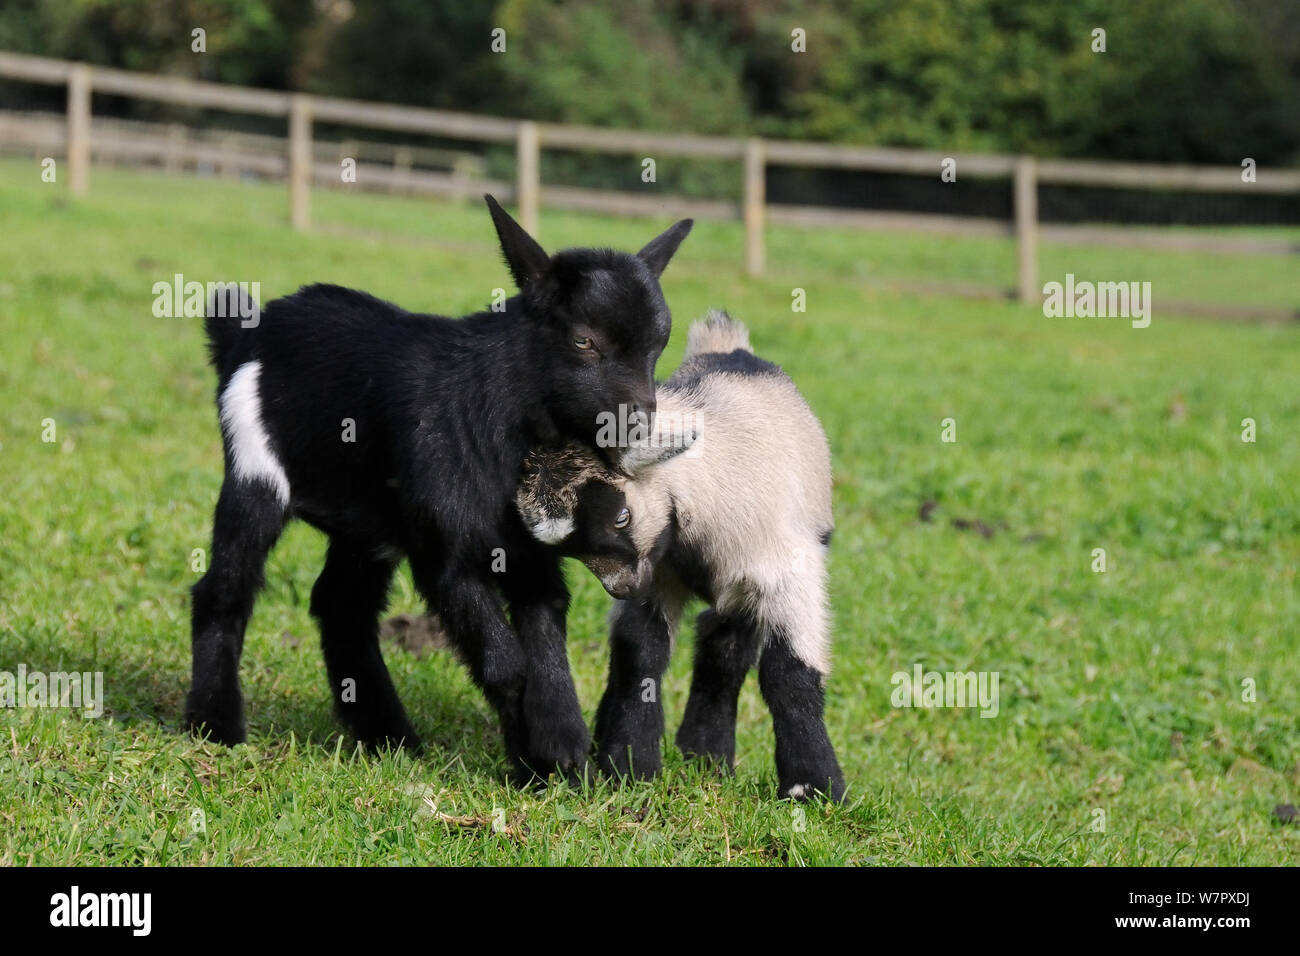 One young Pygmy goat (Capra hircus) butting its sibling playfully, Wiltshire, UK, September. Stock Photo